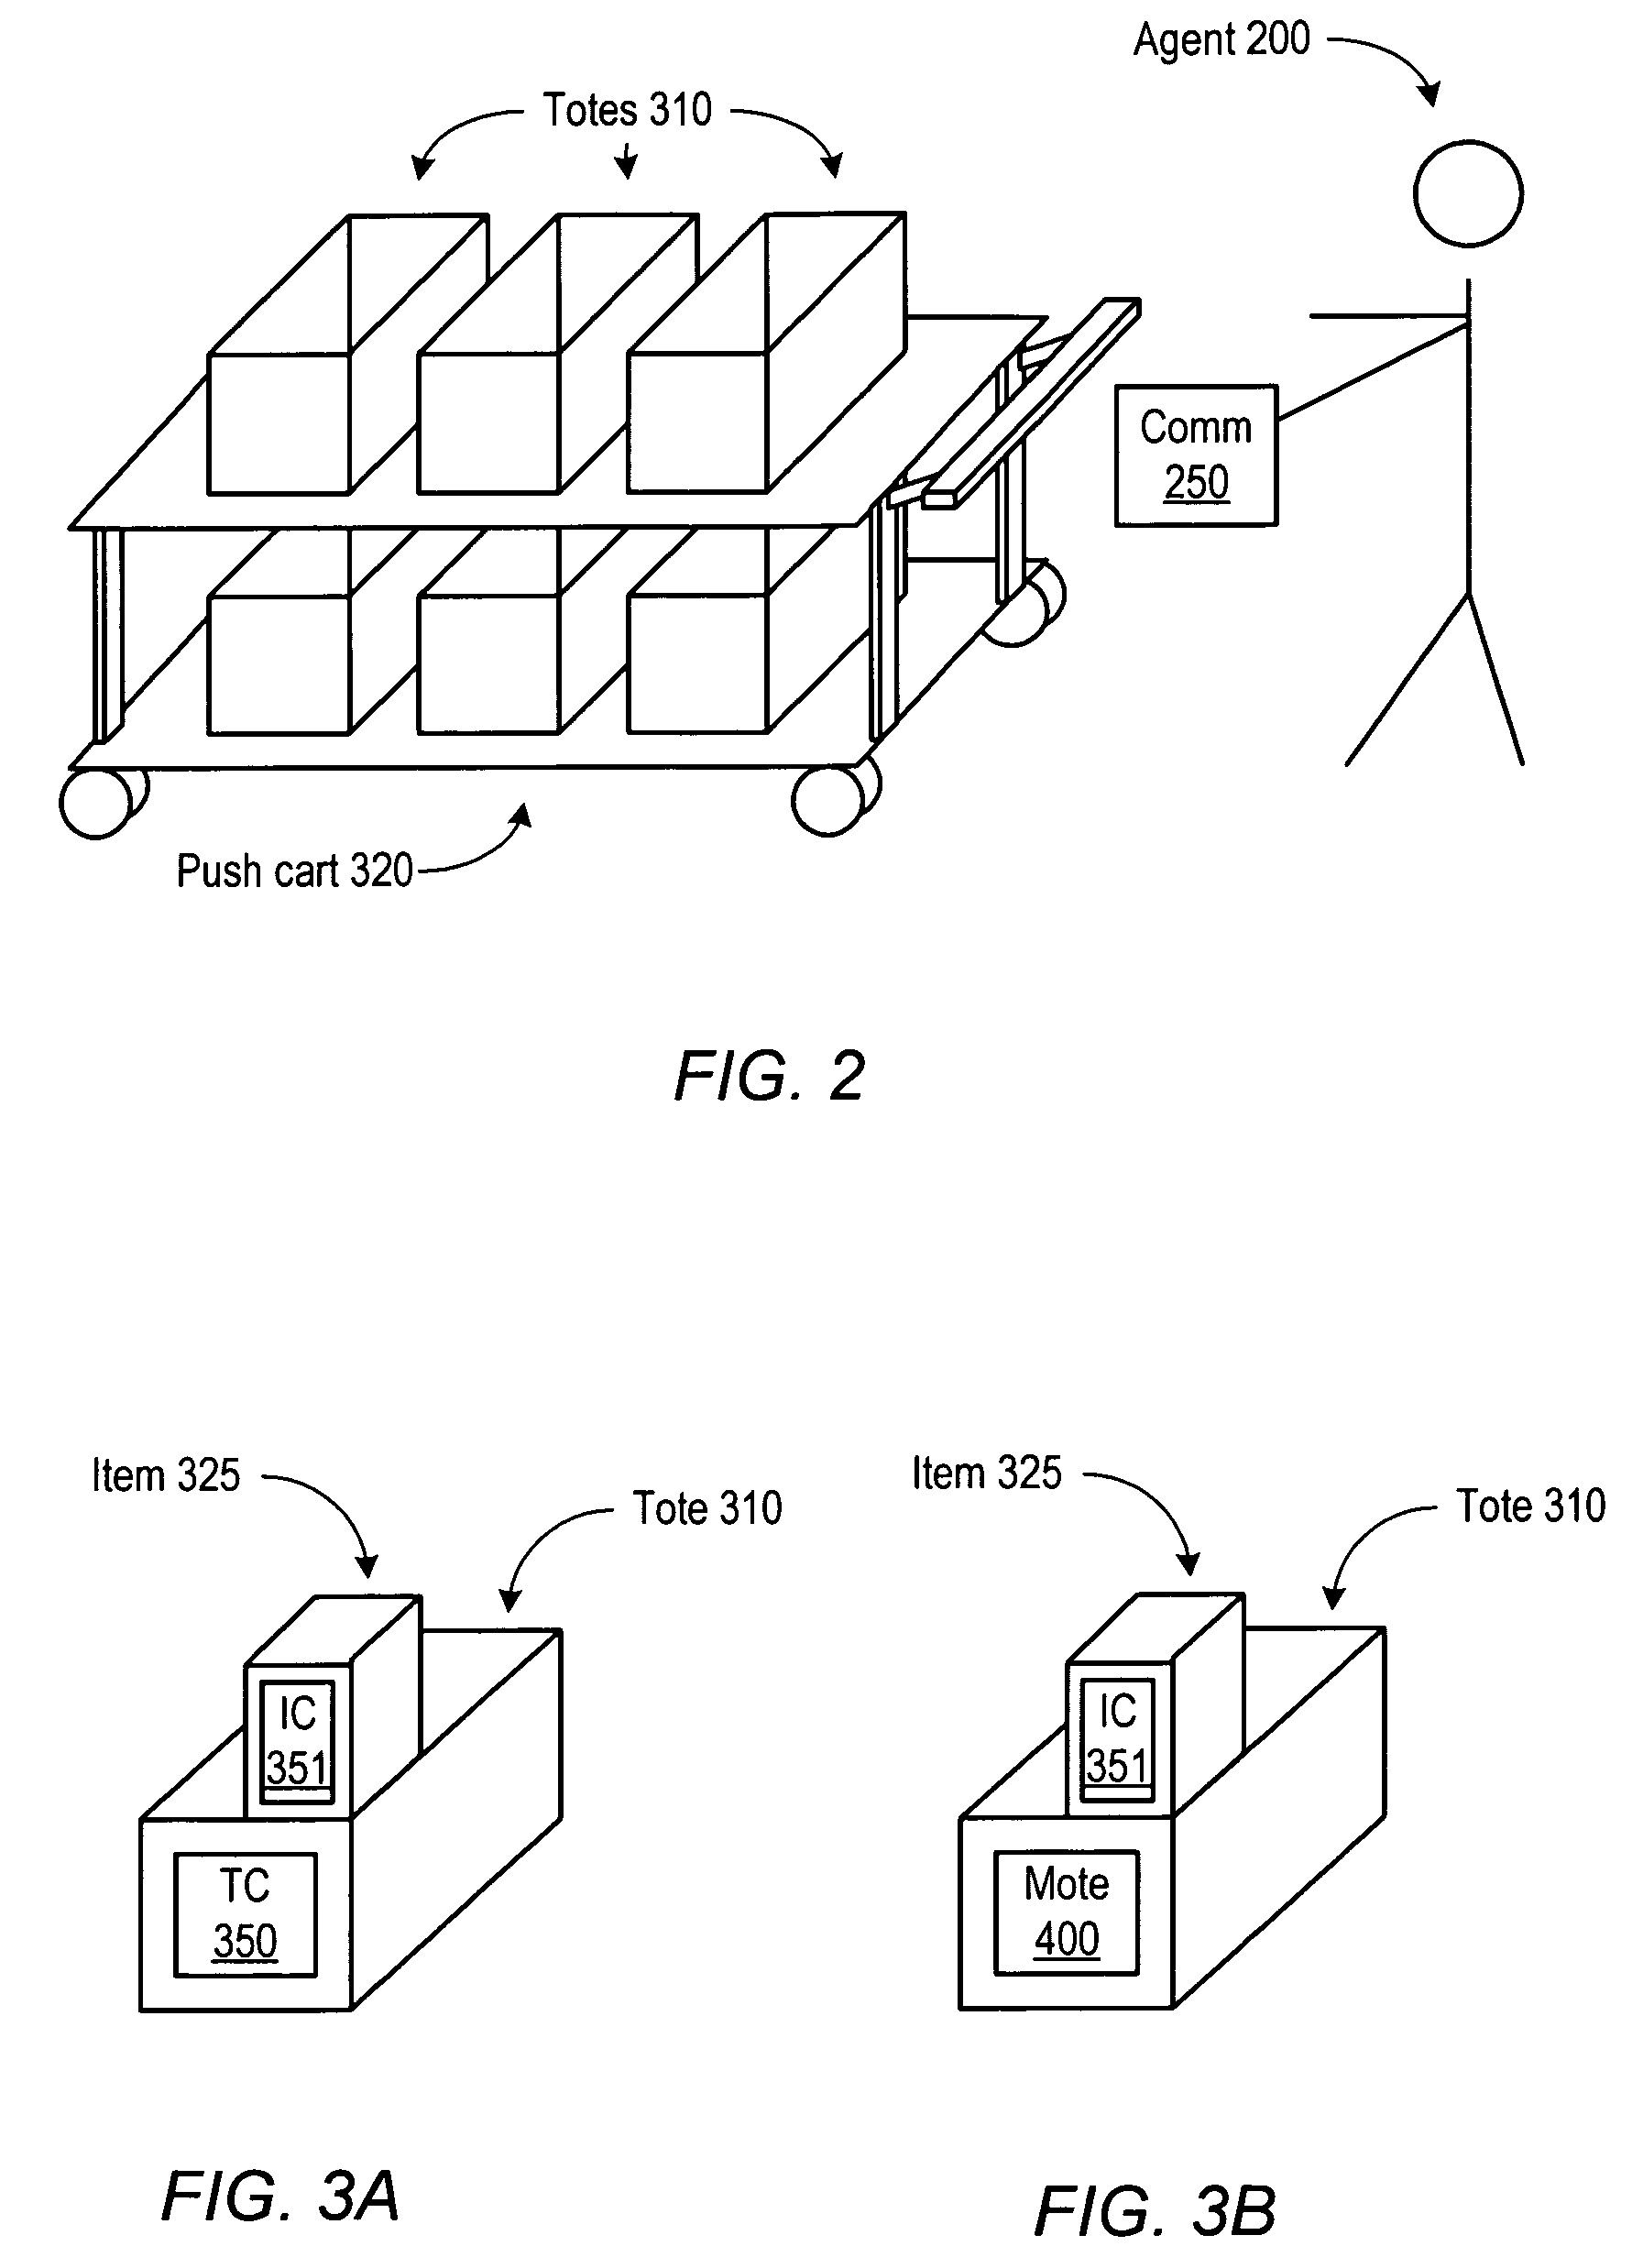 Method and system for predestination item transfer among agents within a materials handling facility